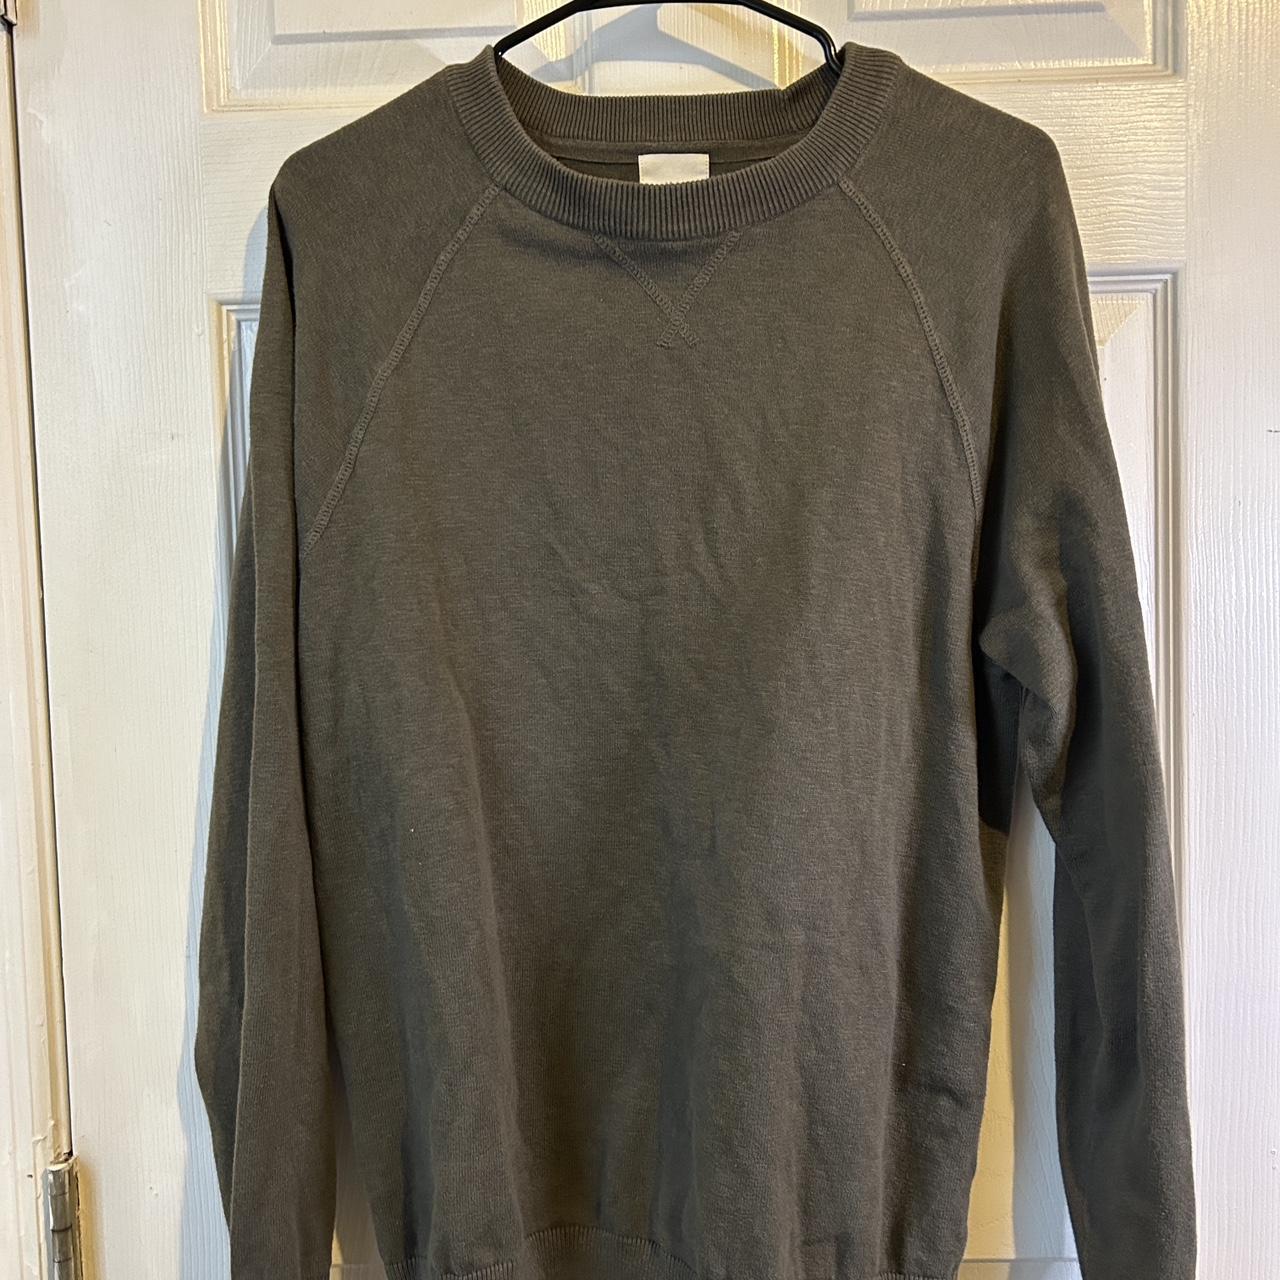 H&M Sweater Olive green color like new, size... - Depop